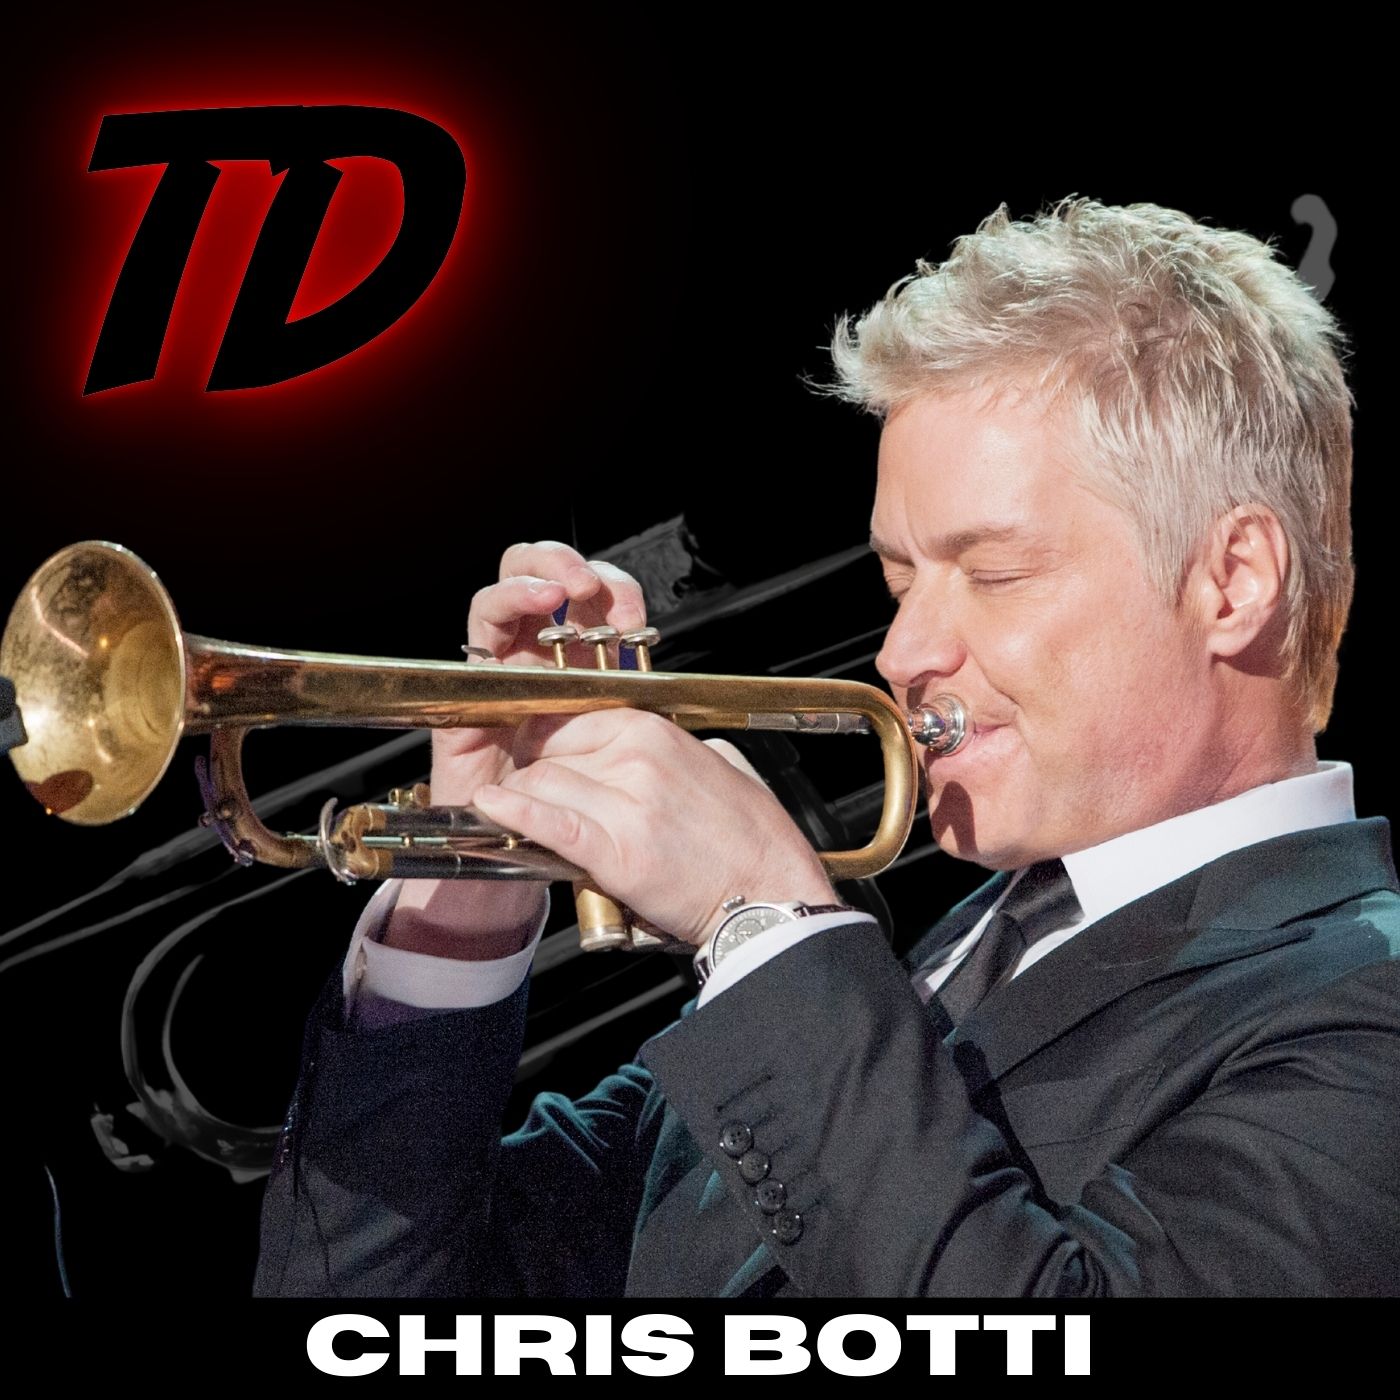 Chris Botti Shares His Thoughts On the “New” Music Business, and Trumpet Q&A from Fellow Players!